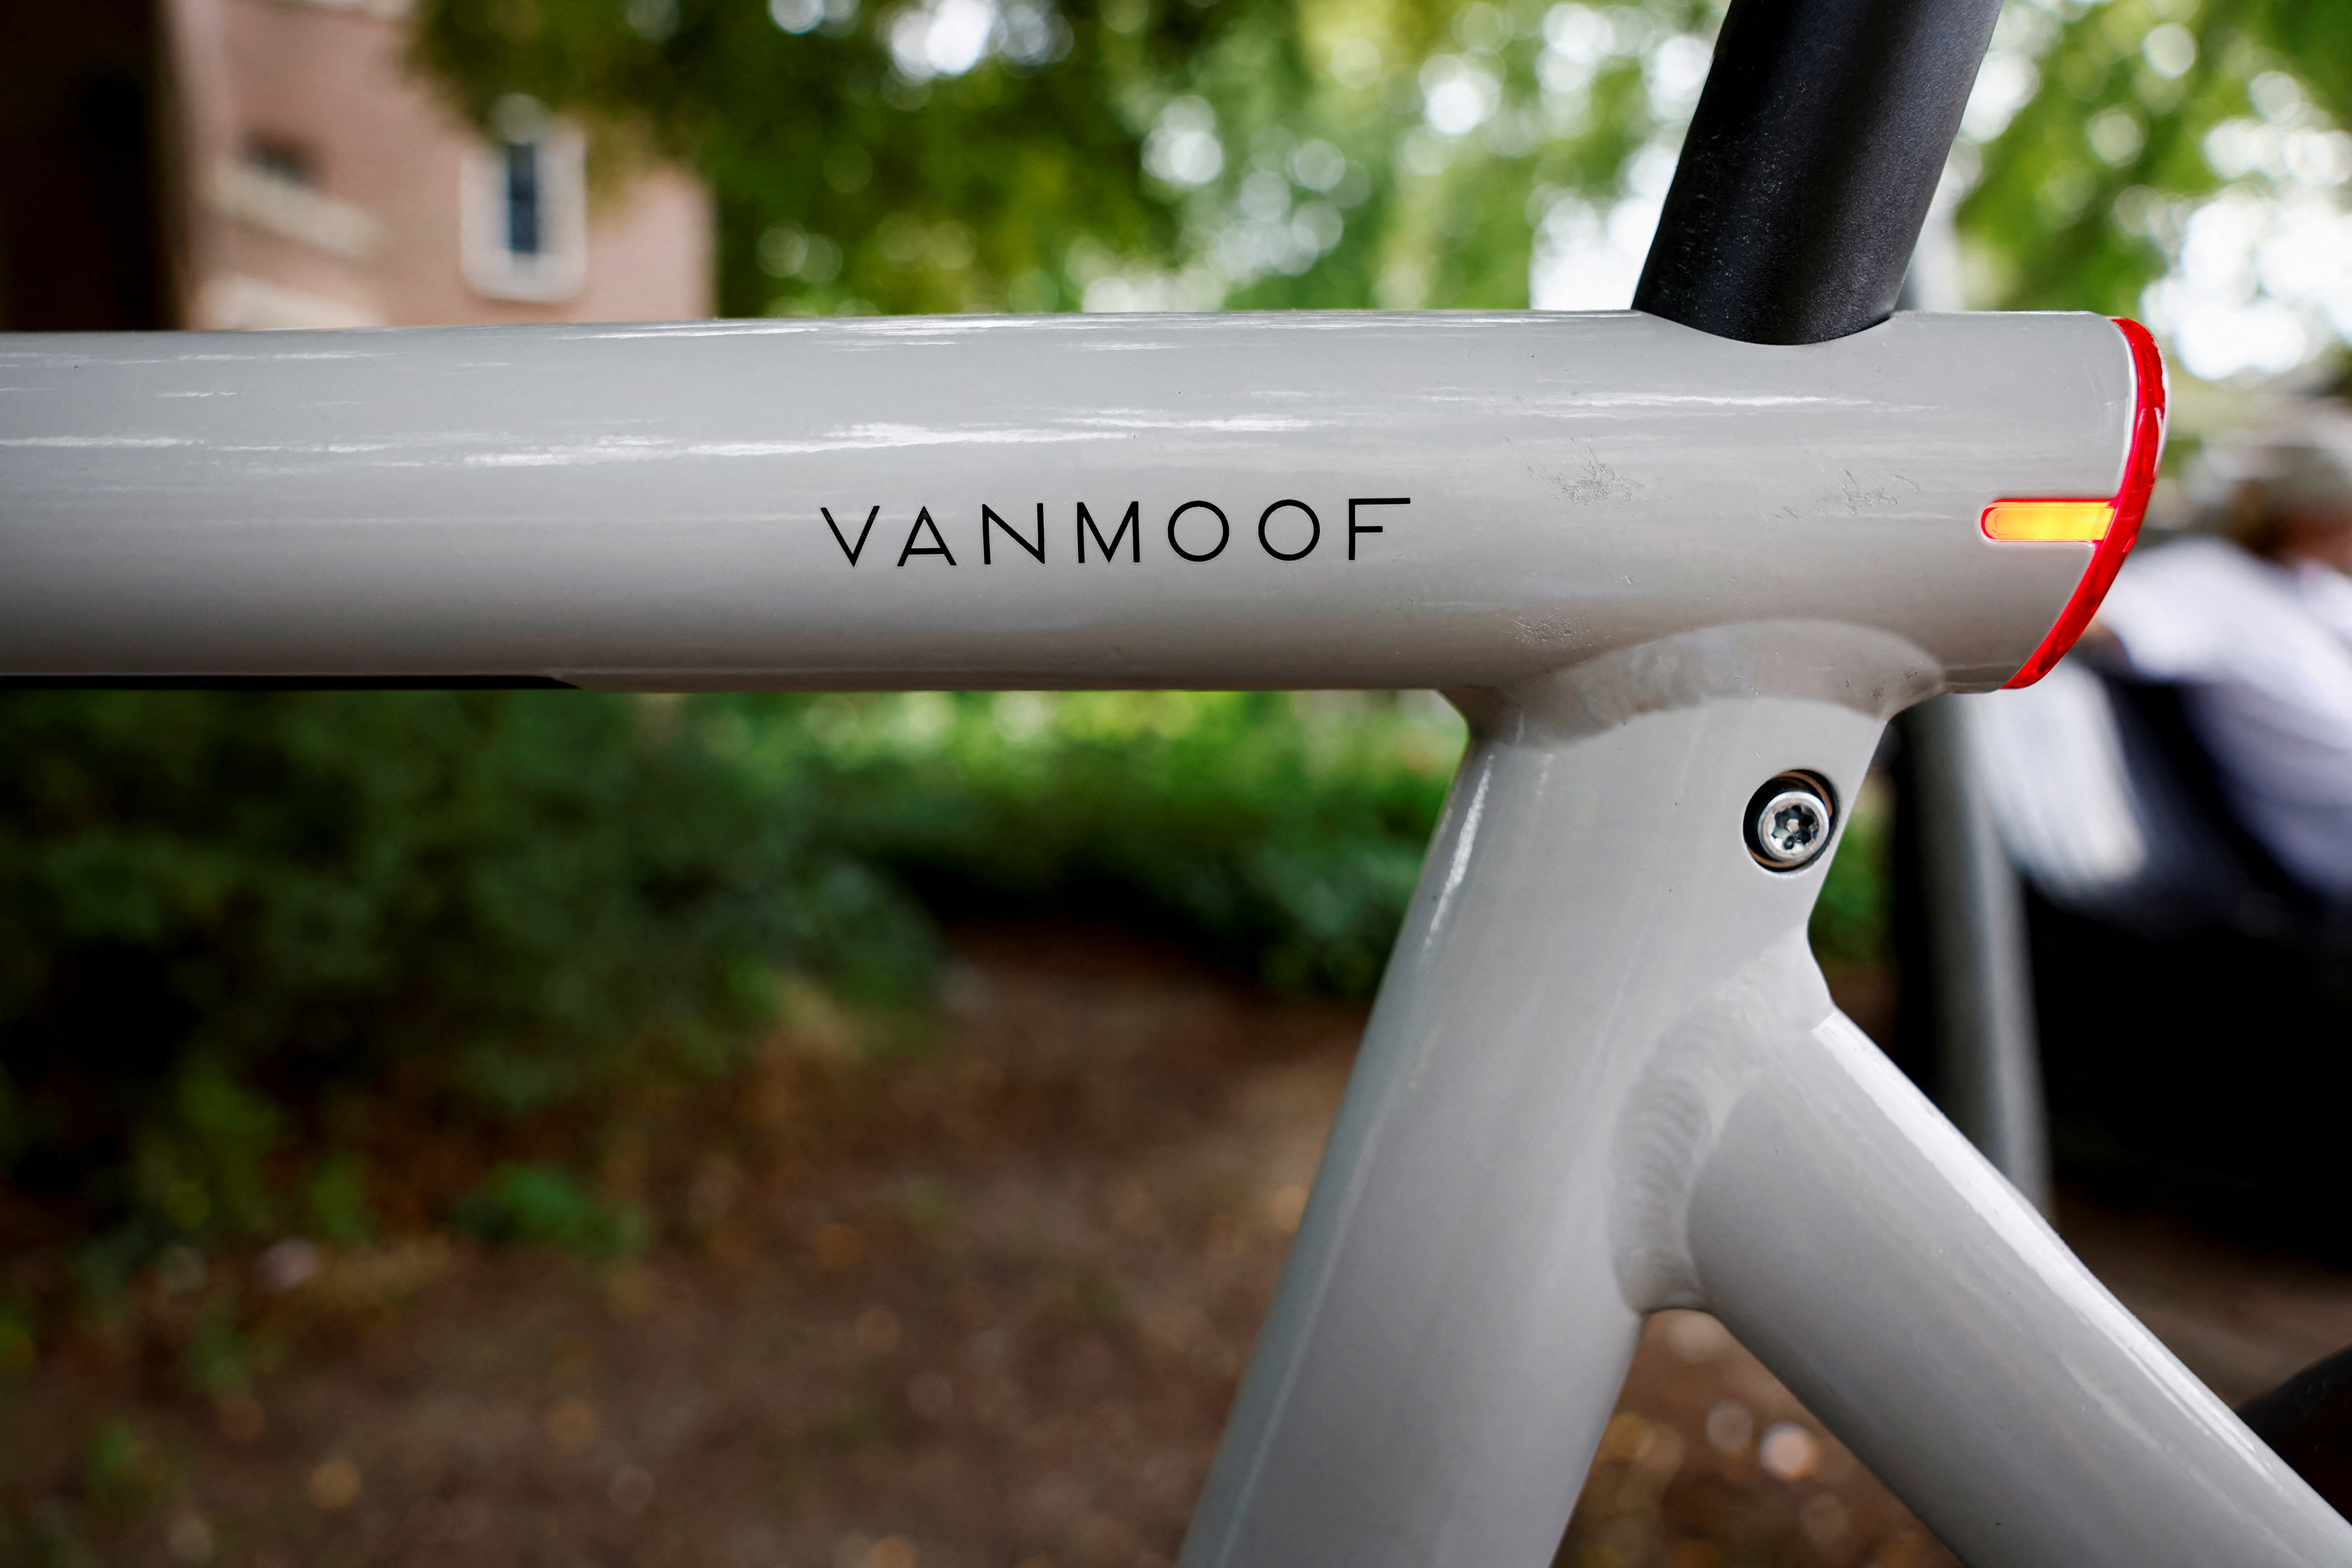 Logo of e-bike maker VanMoof is seen on a bicycle in Amsterdam